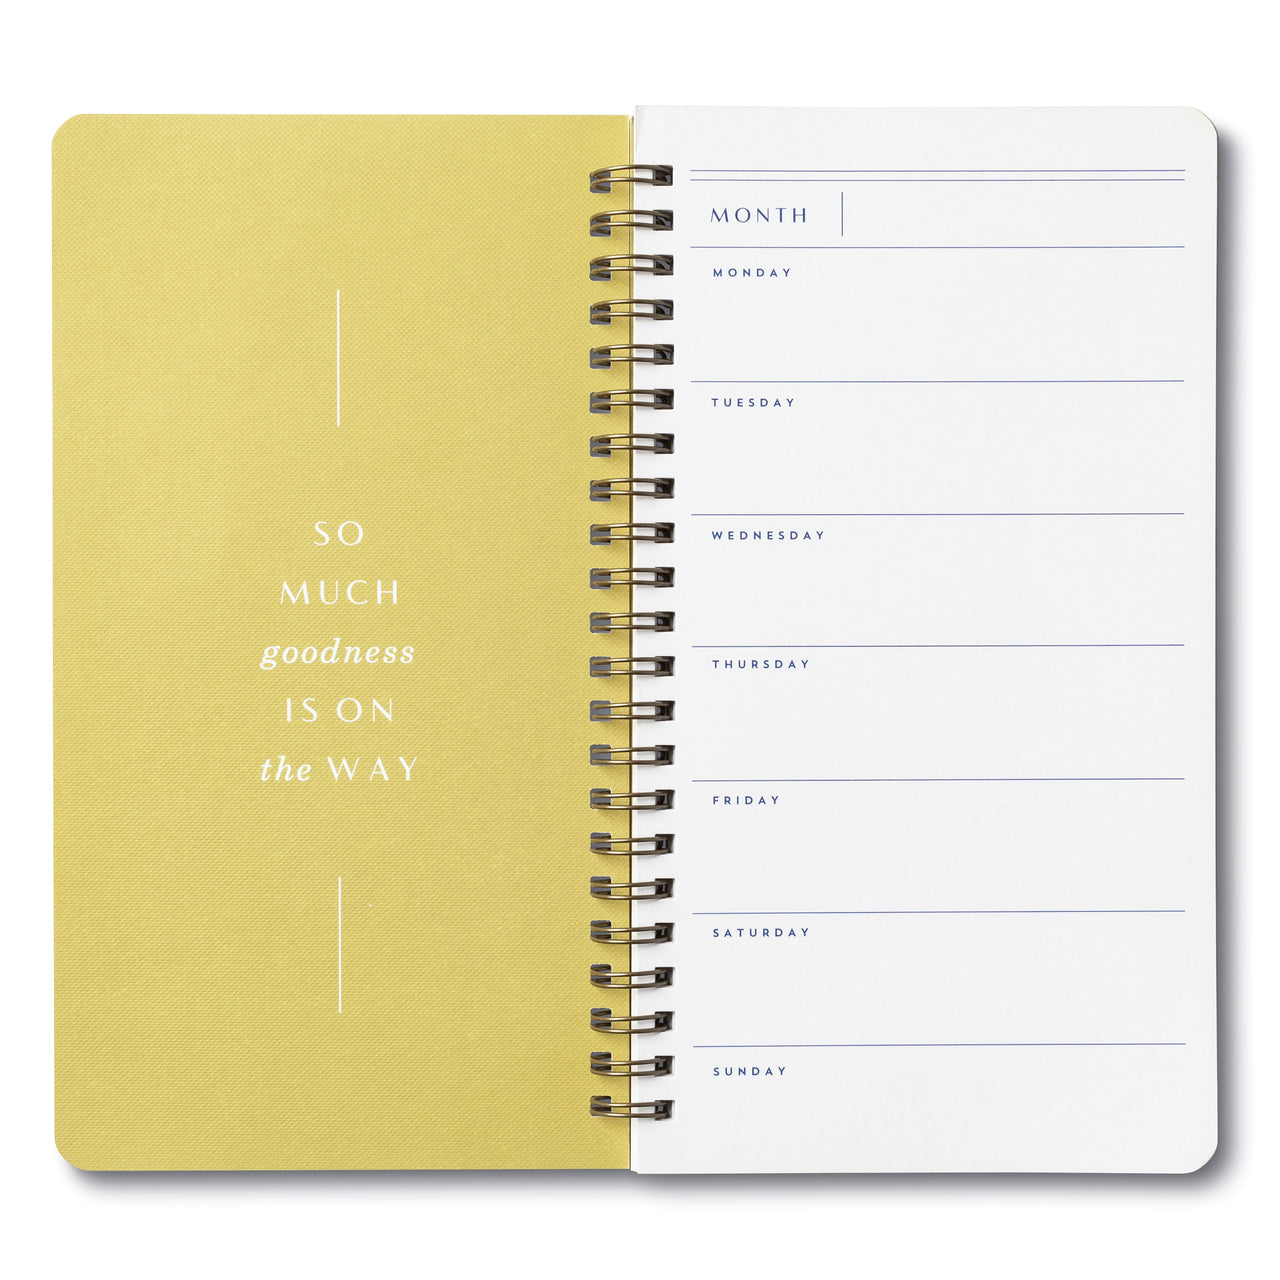 Compendium - Today Should Always Be Our Most Wonderful Day - Undated Weekly Planner